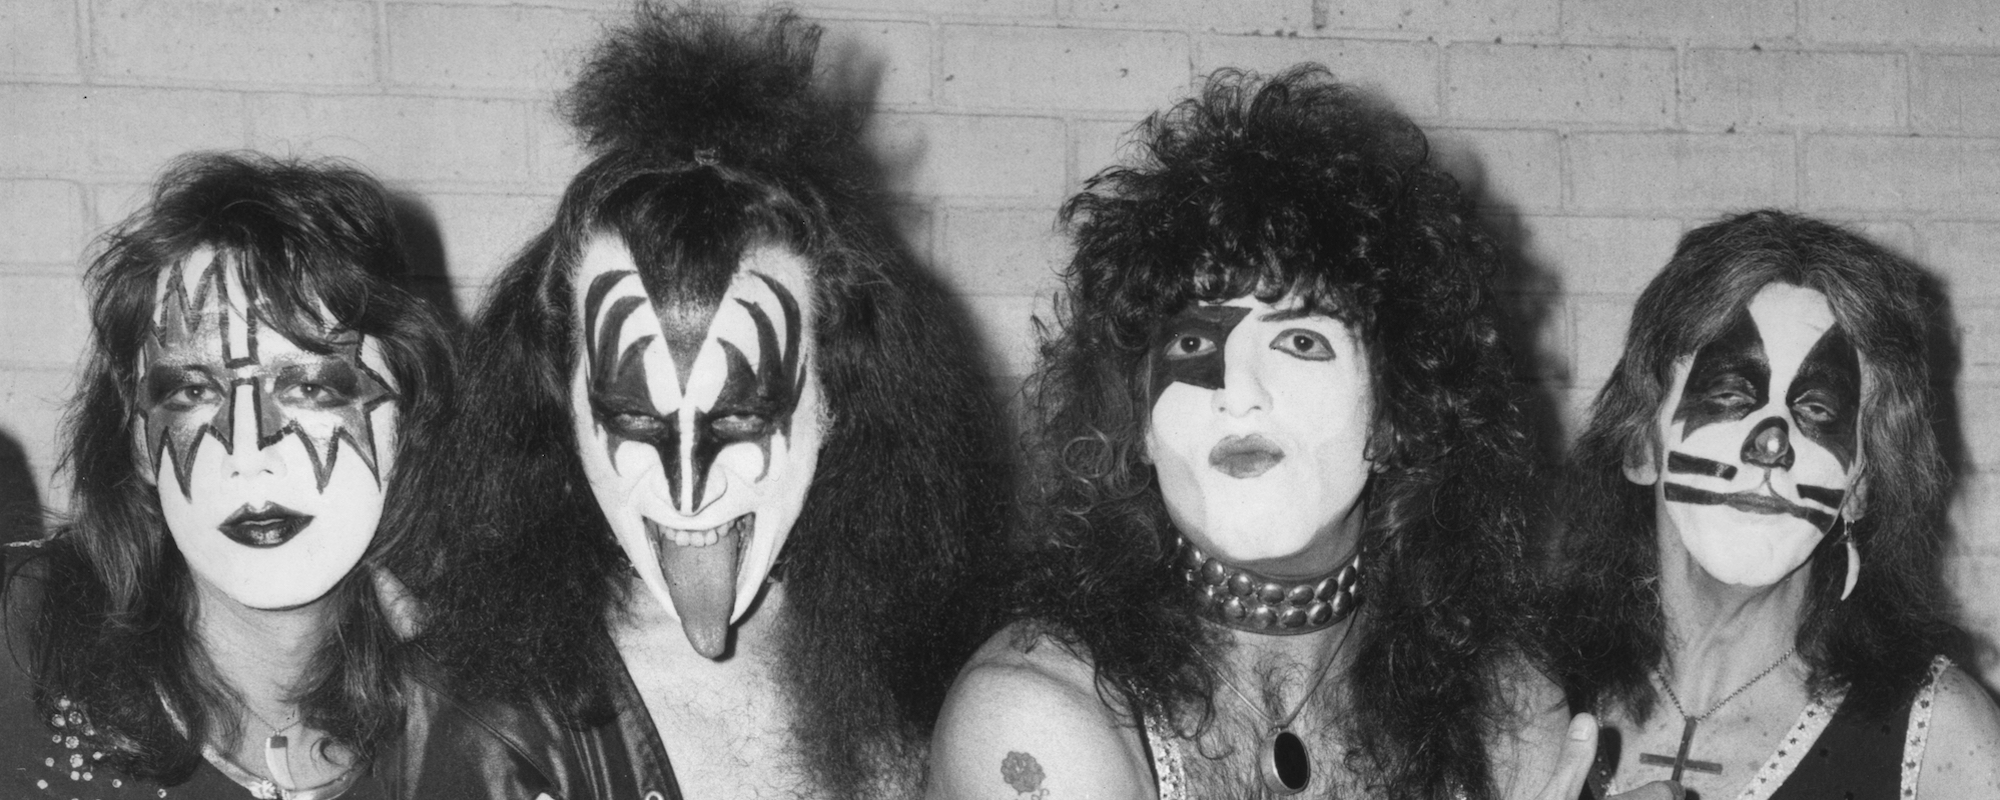 The Story Behind KISS’ 1979 Disco-Rock Hit That Gene Simmons Still Hates, “I Was Made for Lovin’ You”